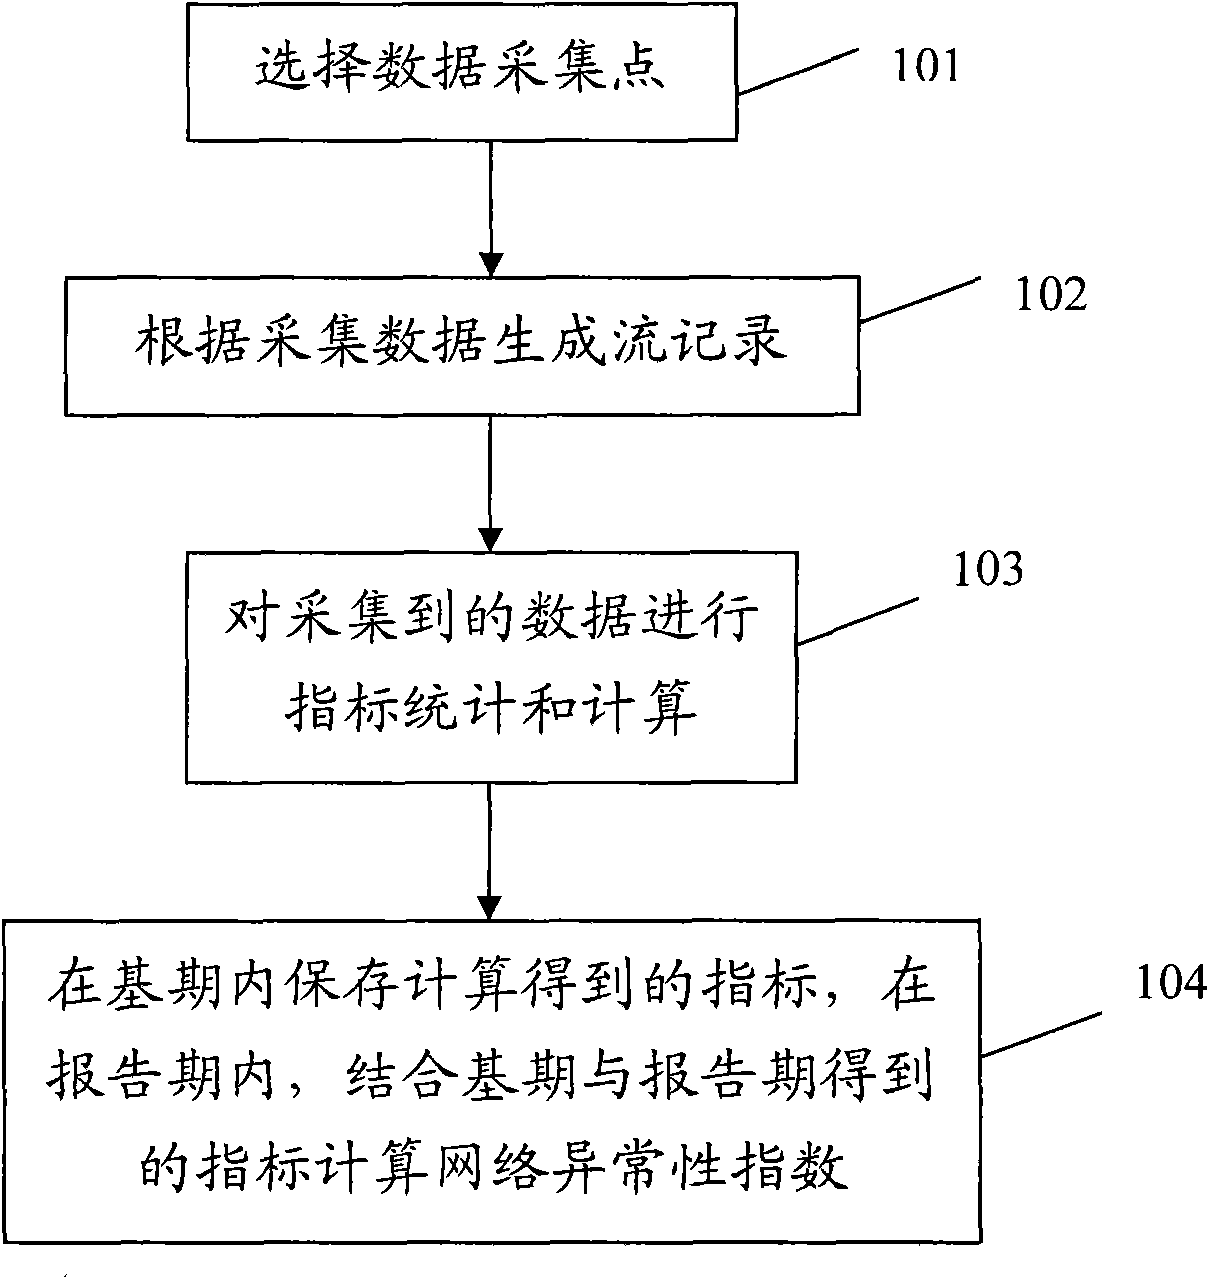 Method and system for quantificationally calculating network abnormity index